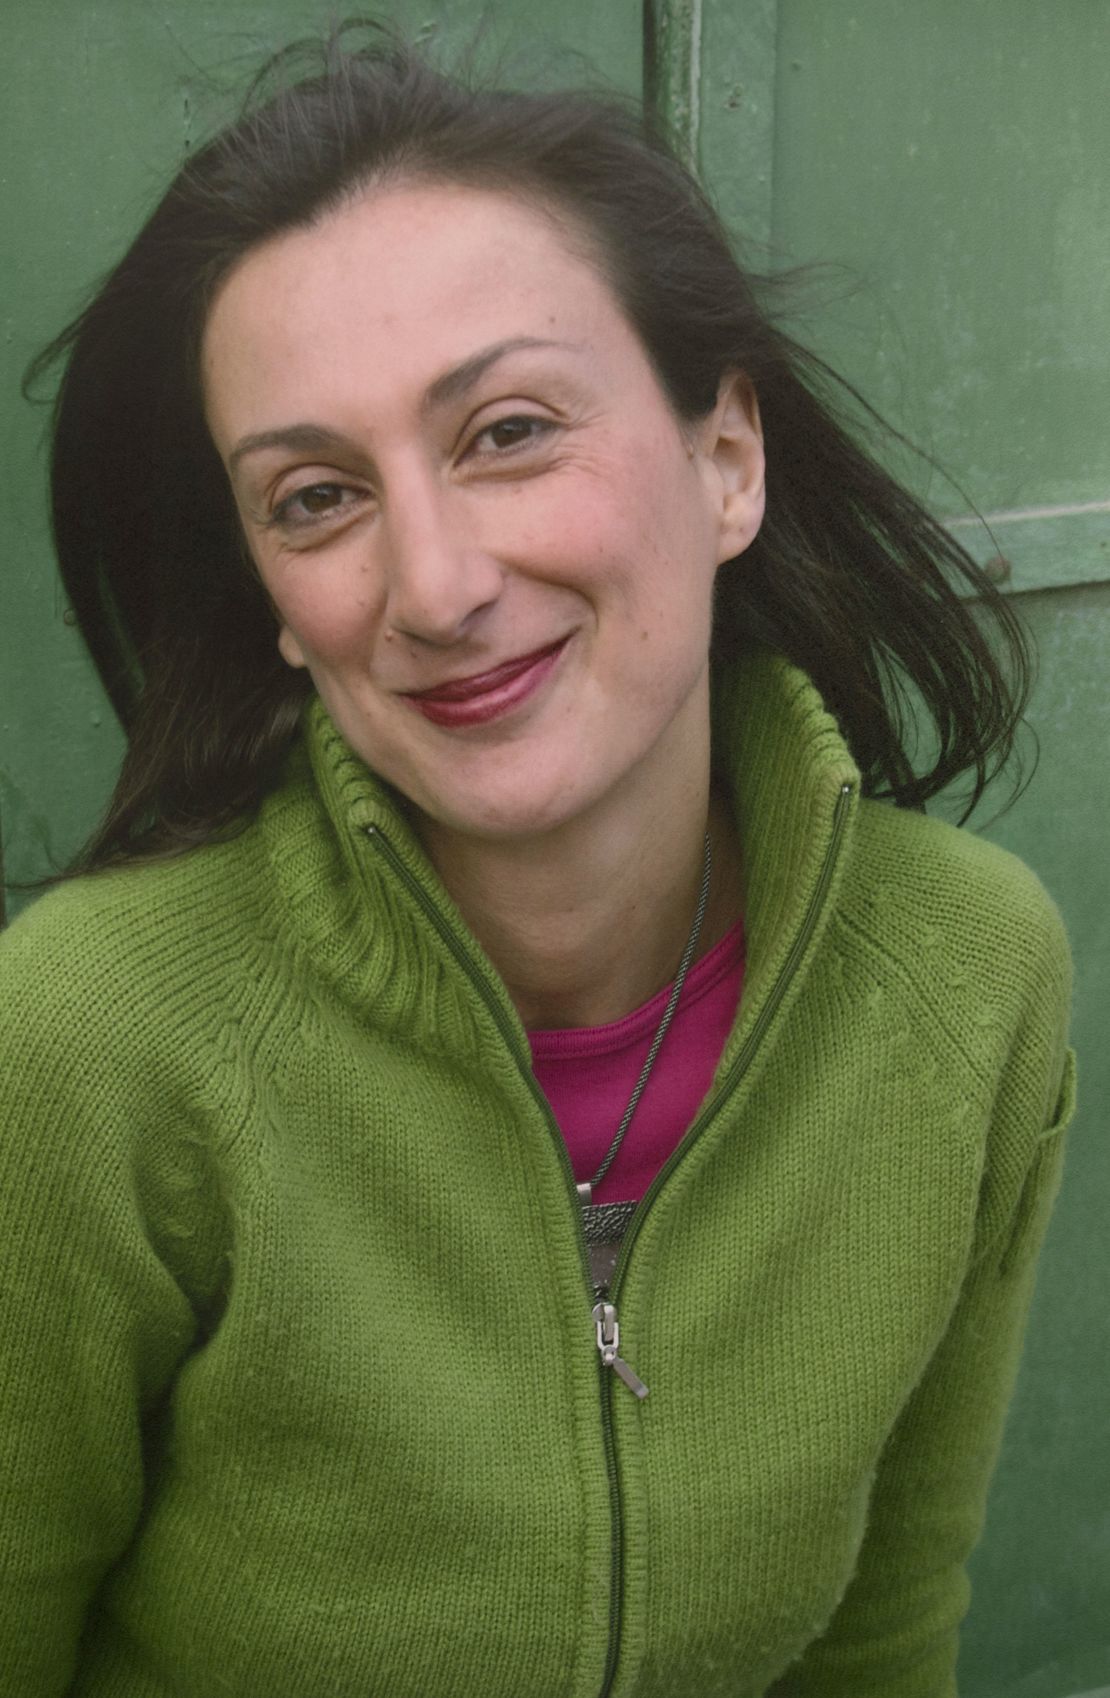 Caruana Galizia was killed by a car bomb on October 16, 2017.